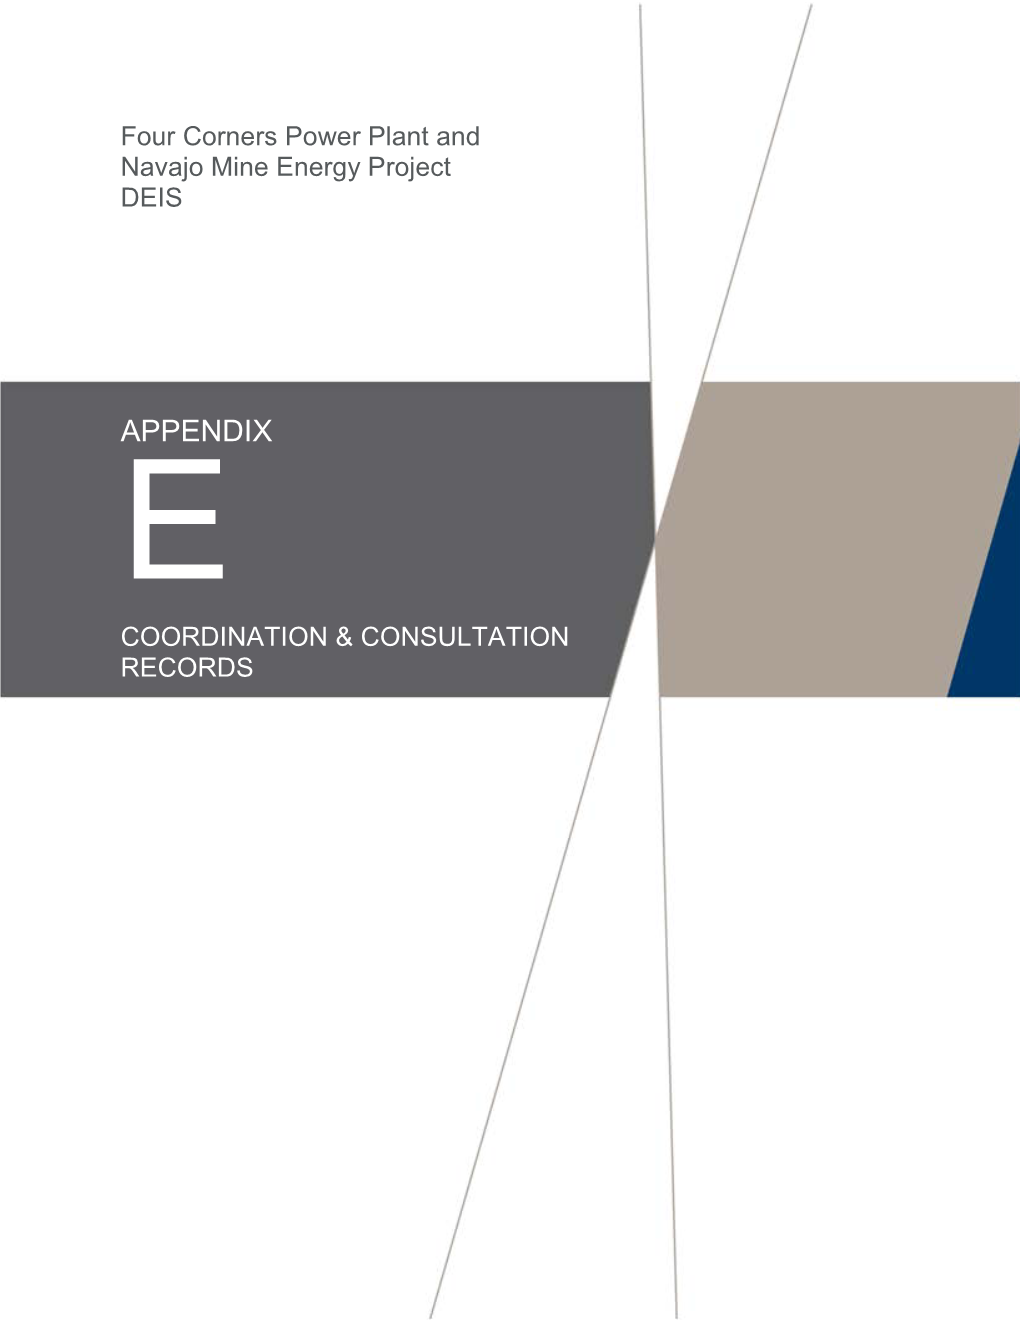 Four Corners Power Plant and Navajo Mine Energy Project DEIS